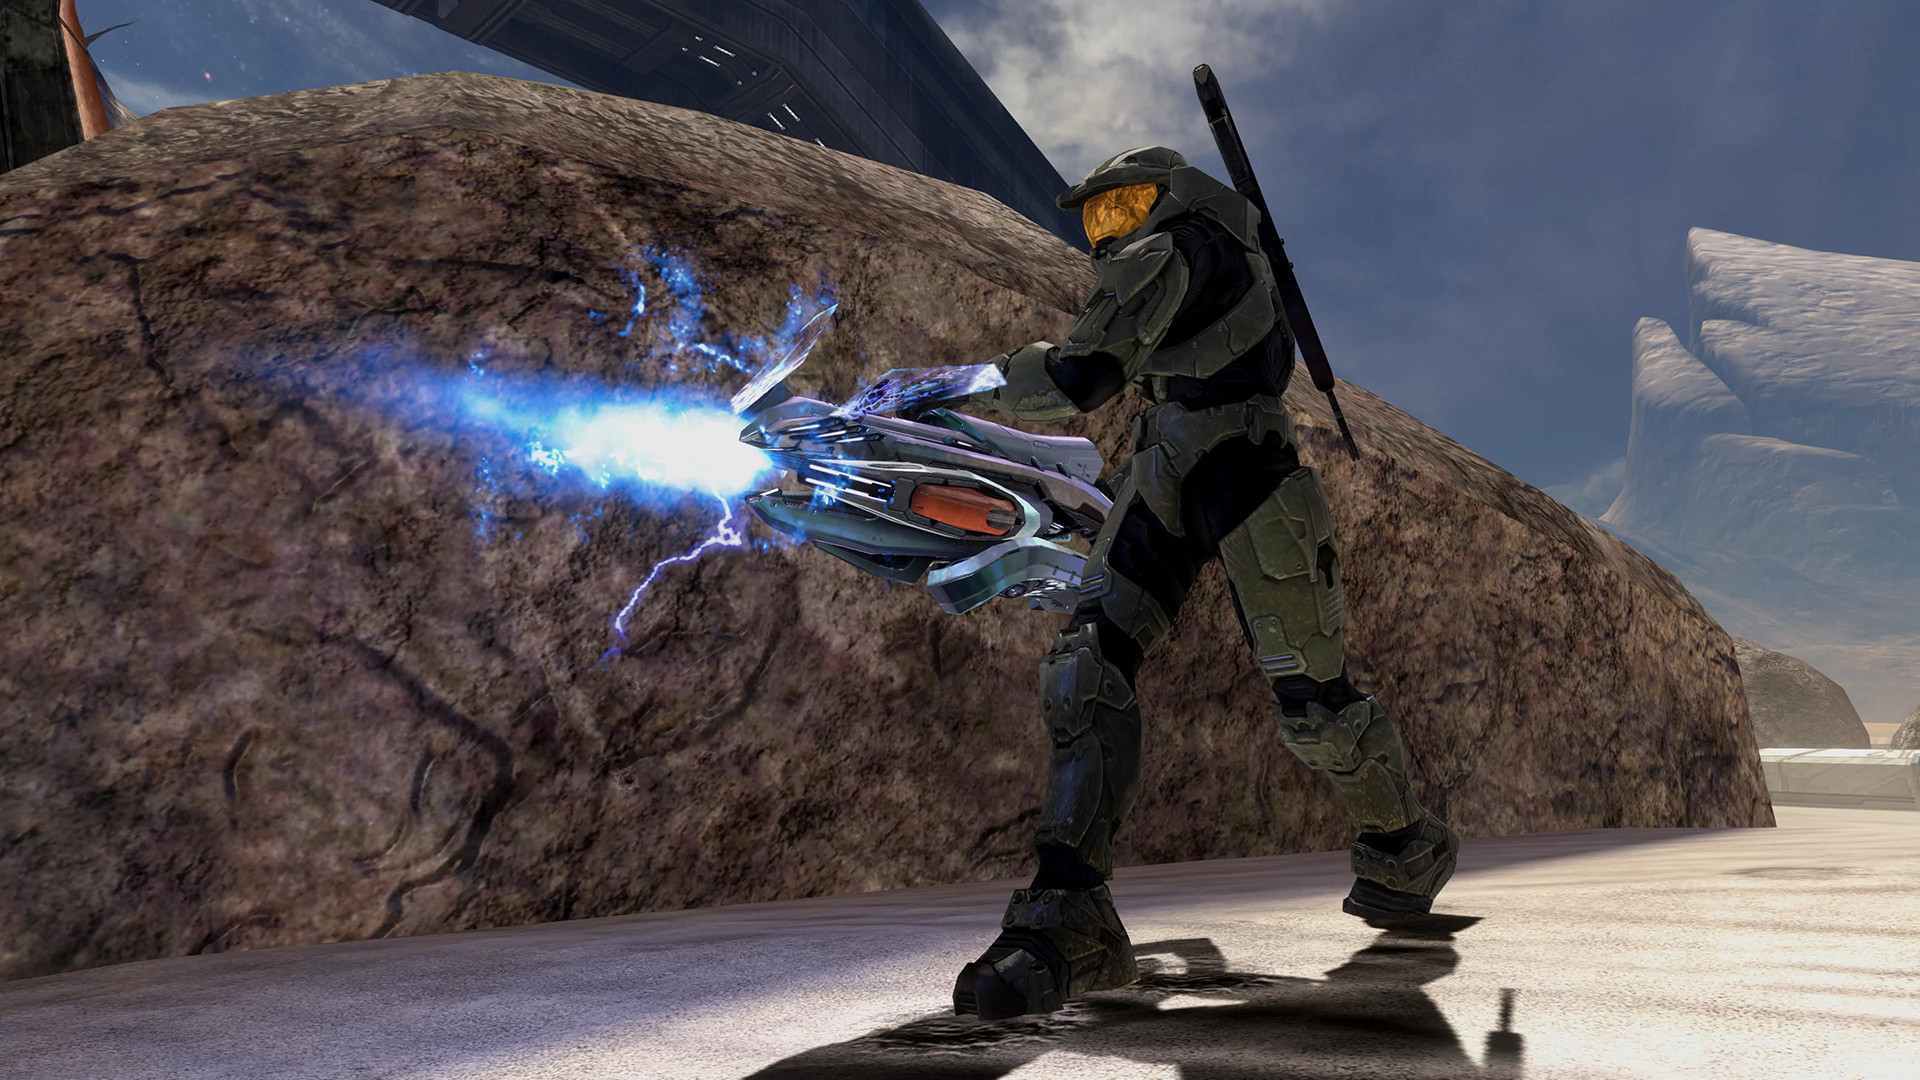 halo-3-finally-launches-on-pc-ahead-of-halo-infinite-s-release-later-this-year-techradar